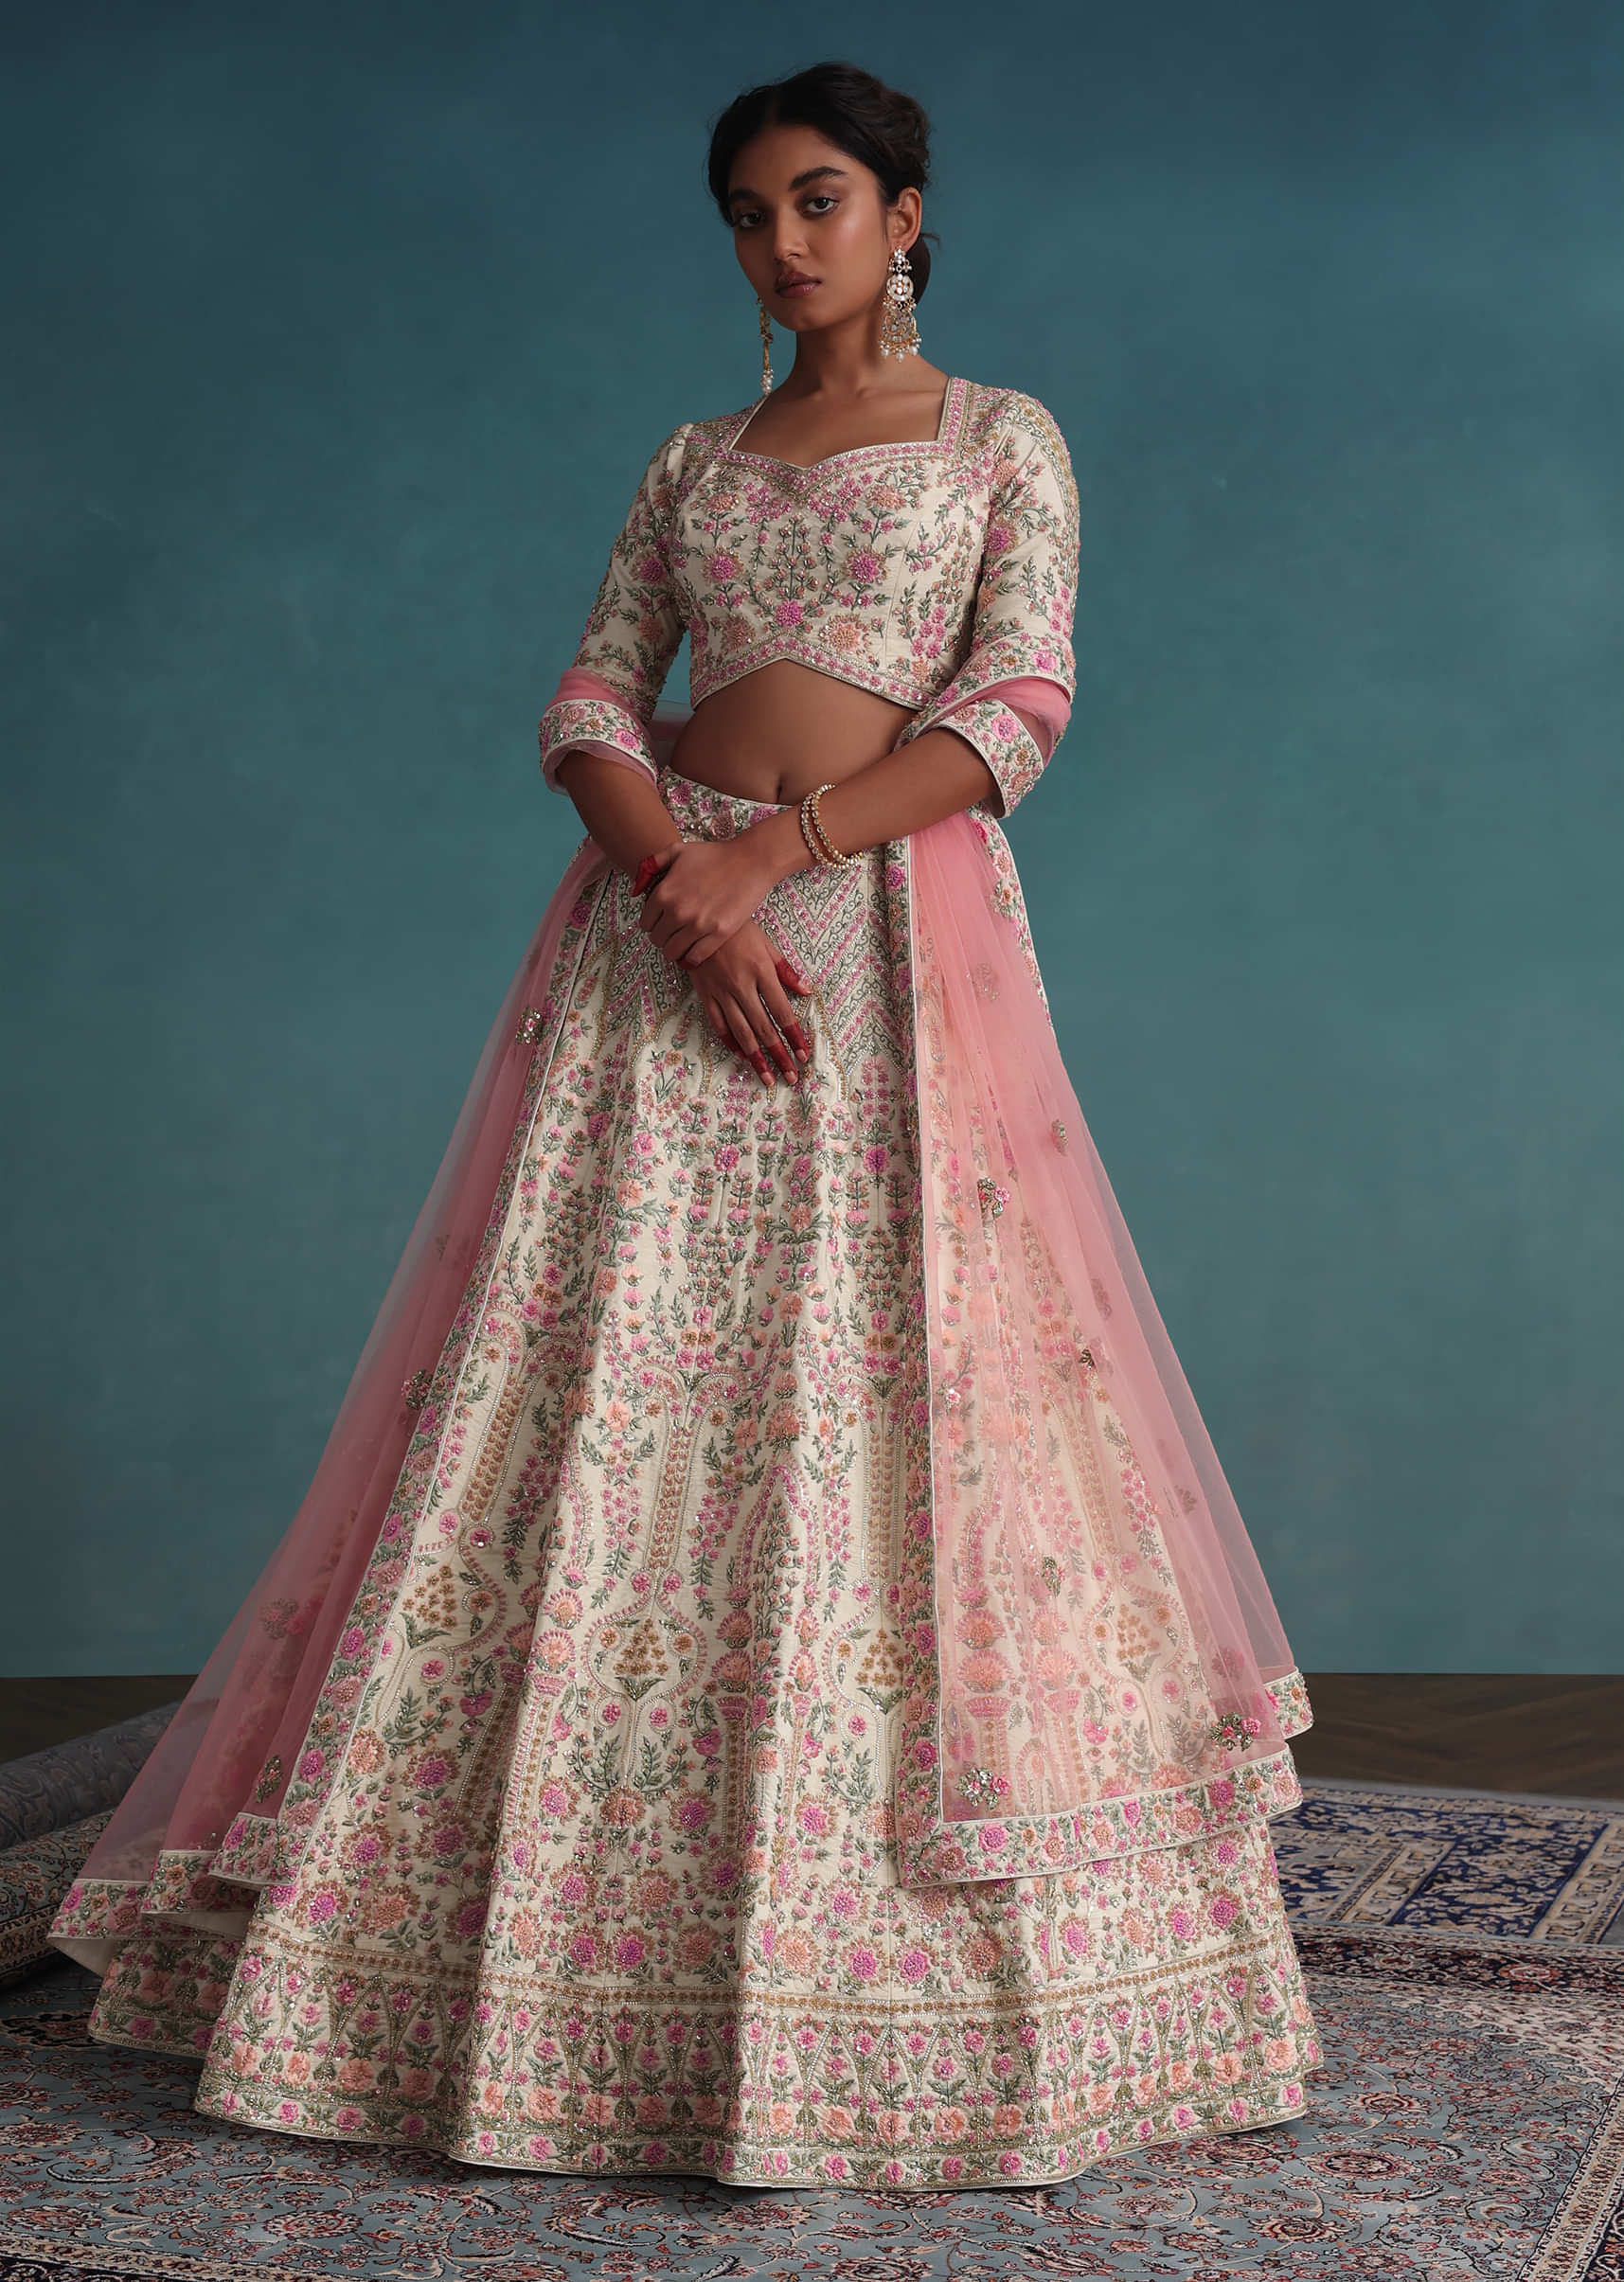 Pearl White Embroidered Bridal Lehenga In Raw Silk With Floral Hand Embroidery